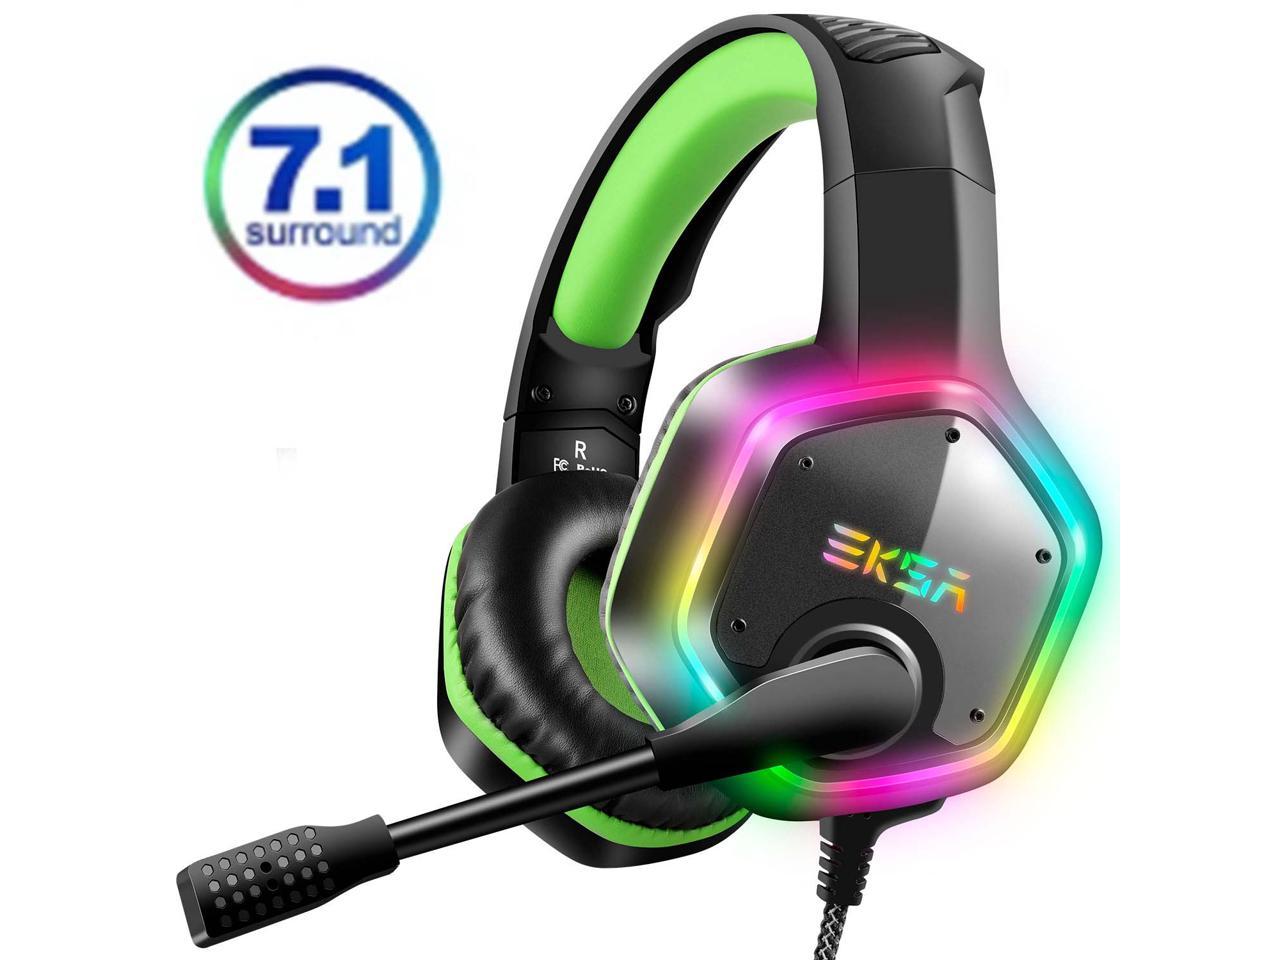 EKSA E1000 Gaming Headset 7.1 Virtual Surround Gaming Headphones Wired USB Earphone With LED RGB Light Mic For Computer/PC/PS4 Gray/Green